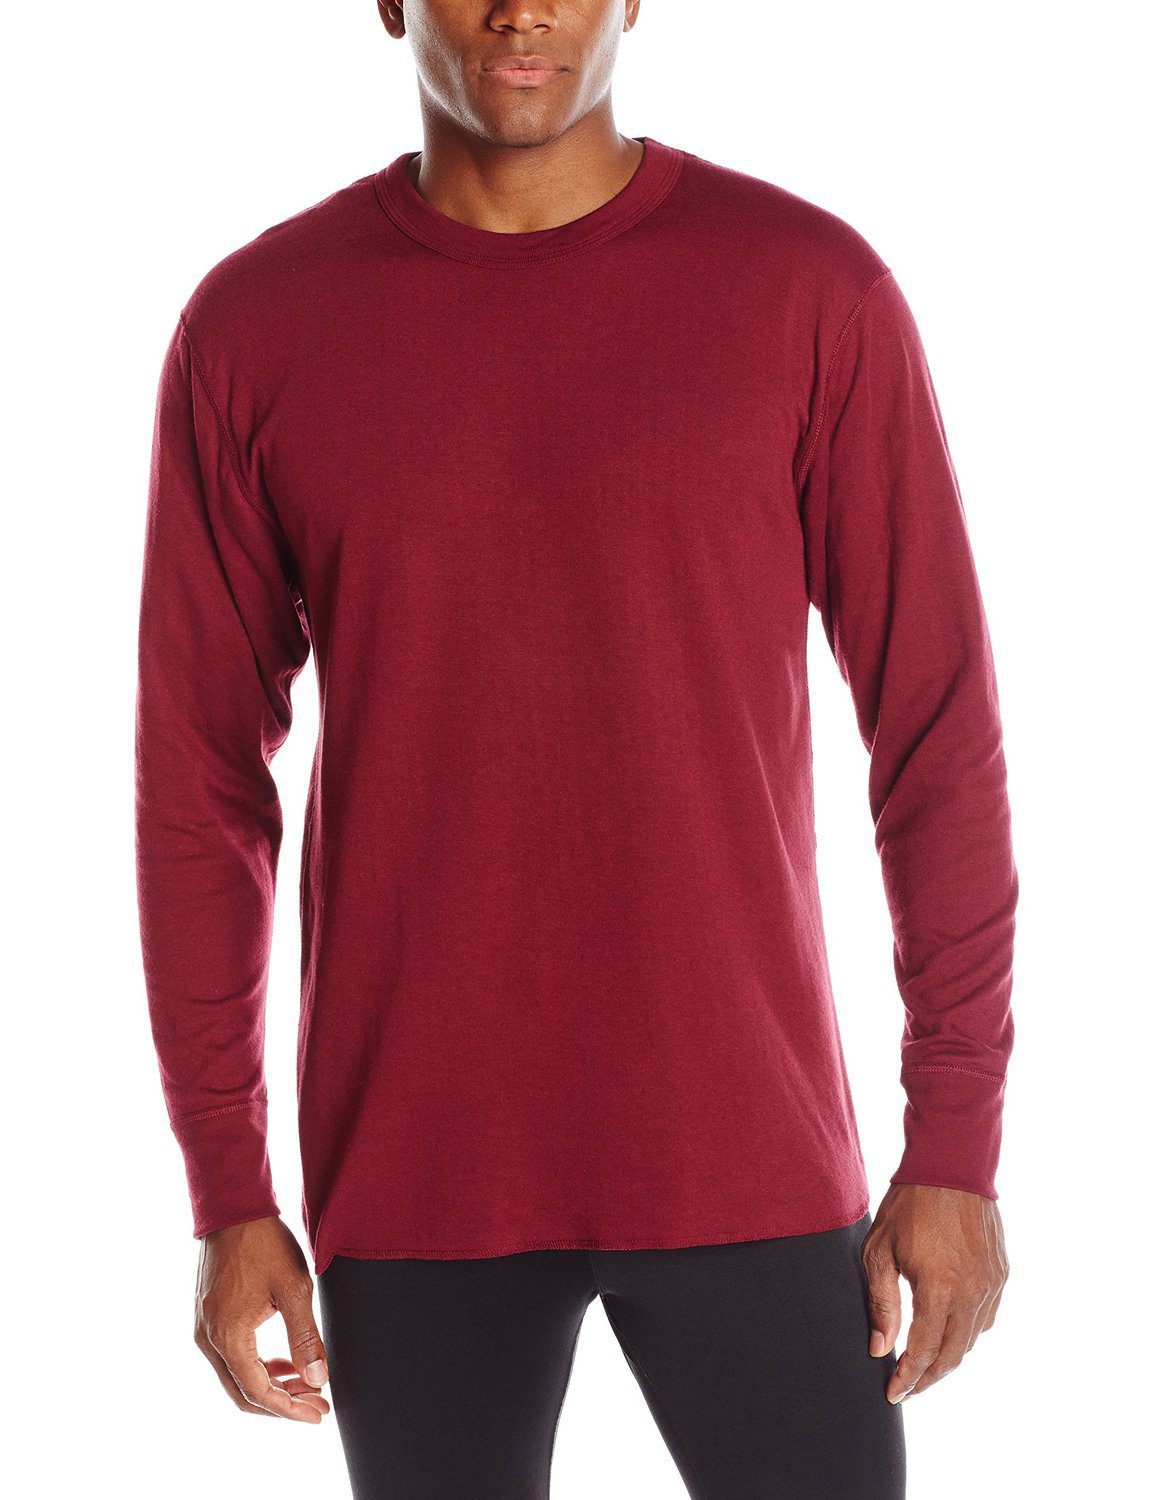 Champion Duofold by Originals Wool-Blend Men's Thermal Shirt